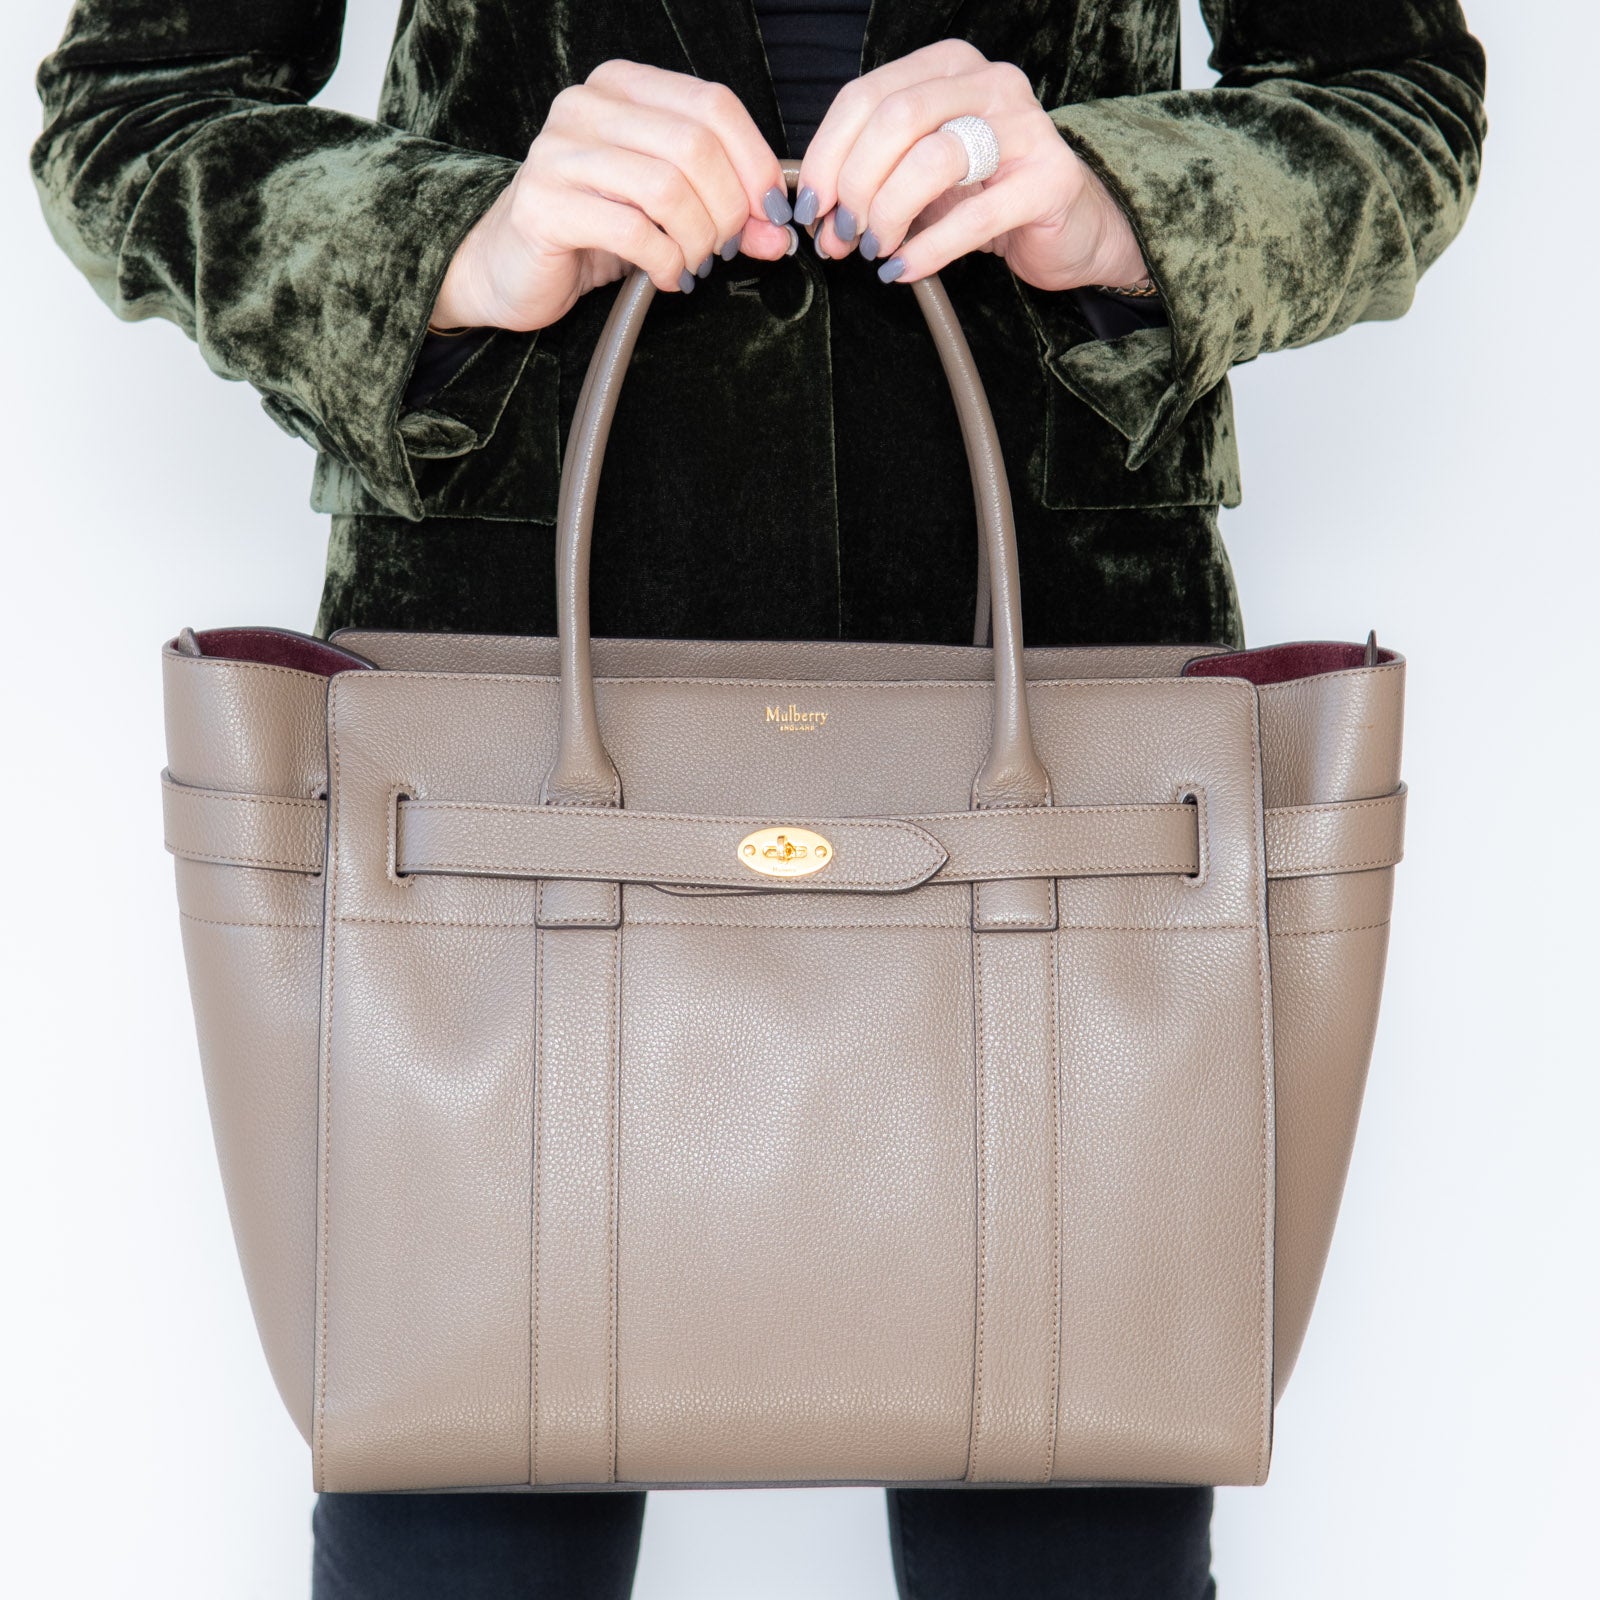 Mulberry Mushroom Zipped Bayswater Leather Bag